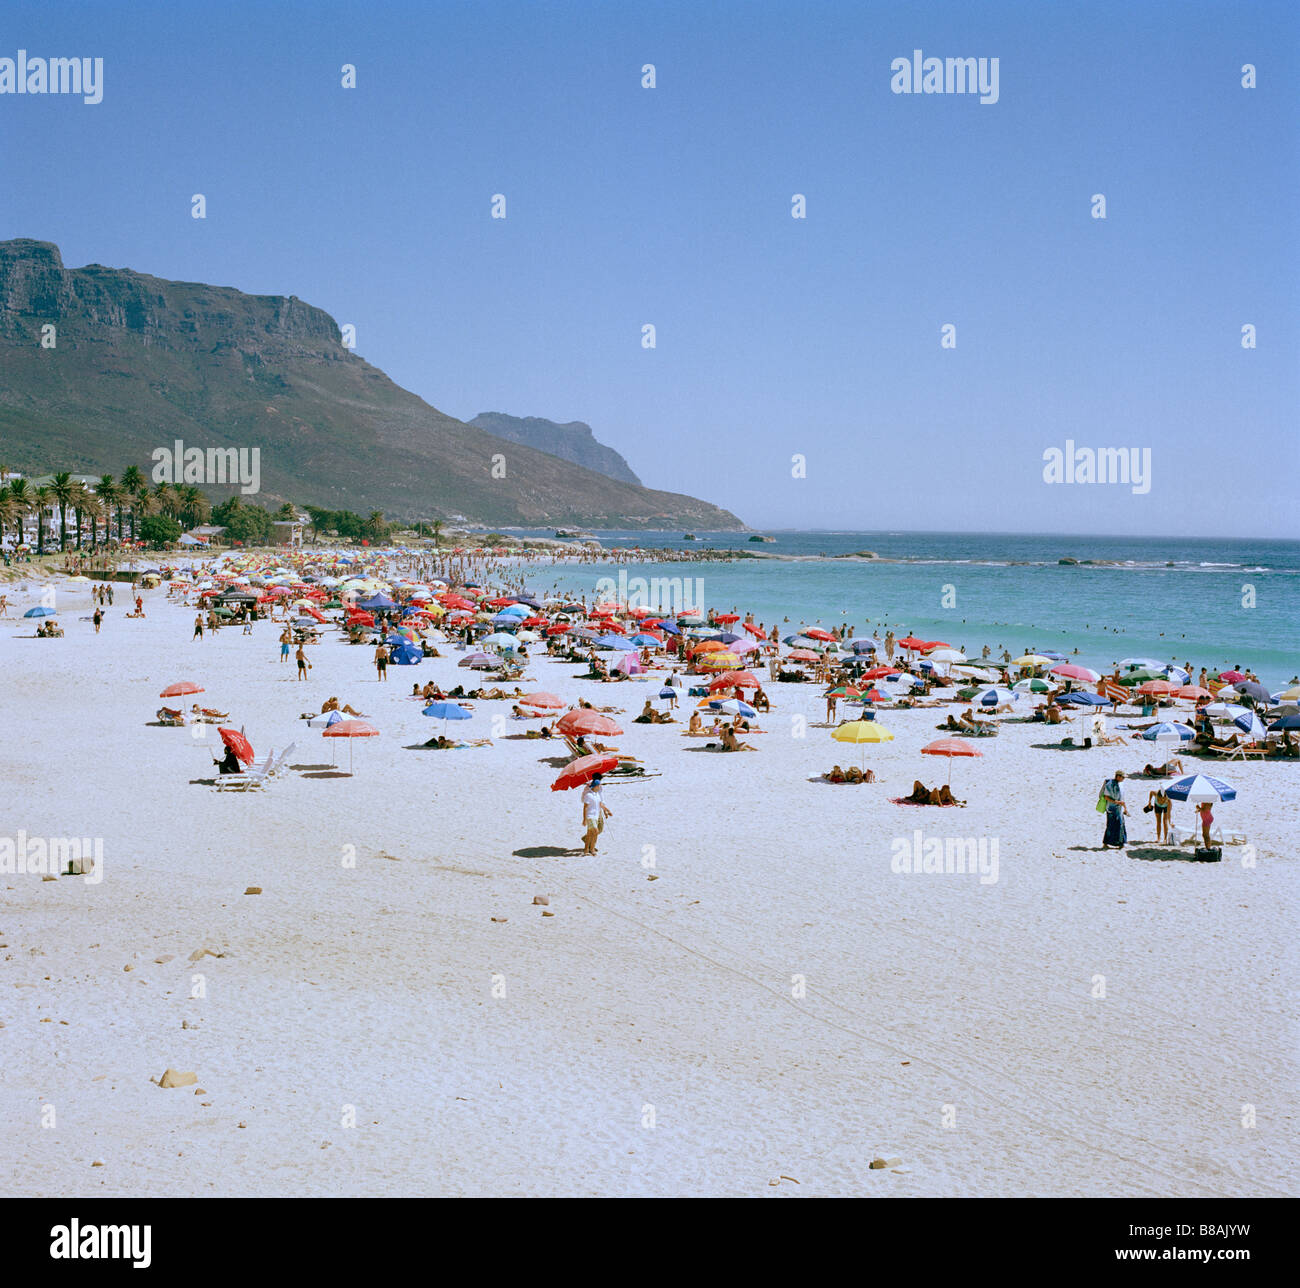 Camps Bay beach and sea in Cape Town in South Africa Sub Saharan Africa. Apartheid Capetown African Holiday Vacation Tourism Tourist Travel Seascape Stock Photo